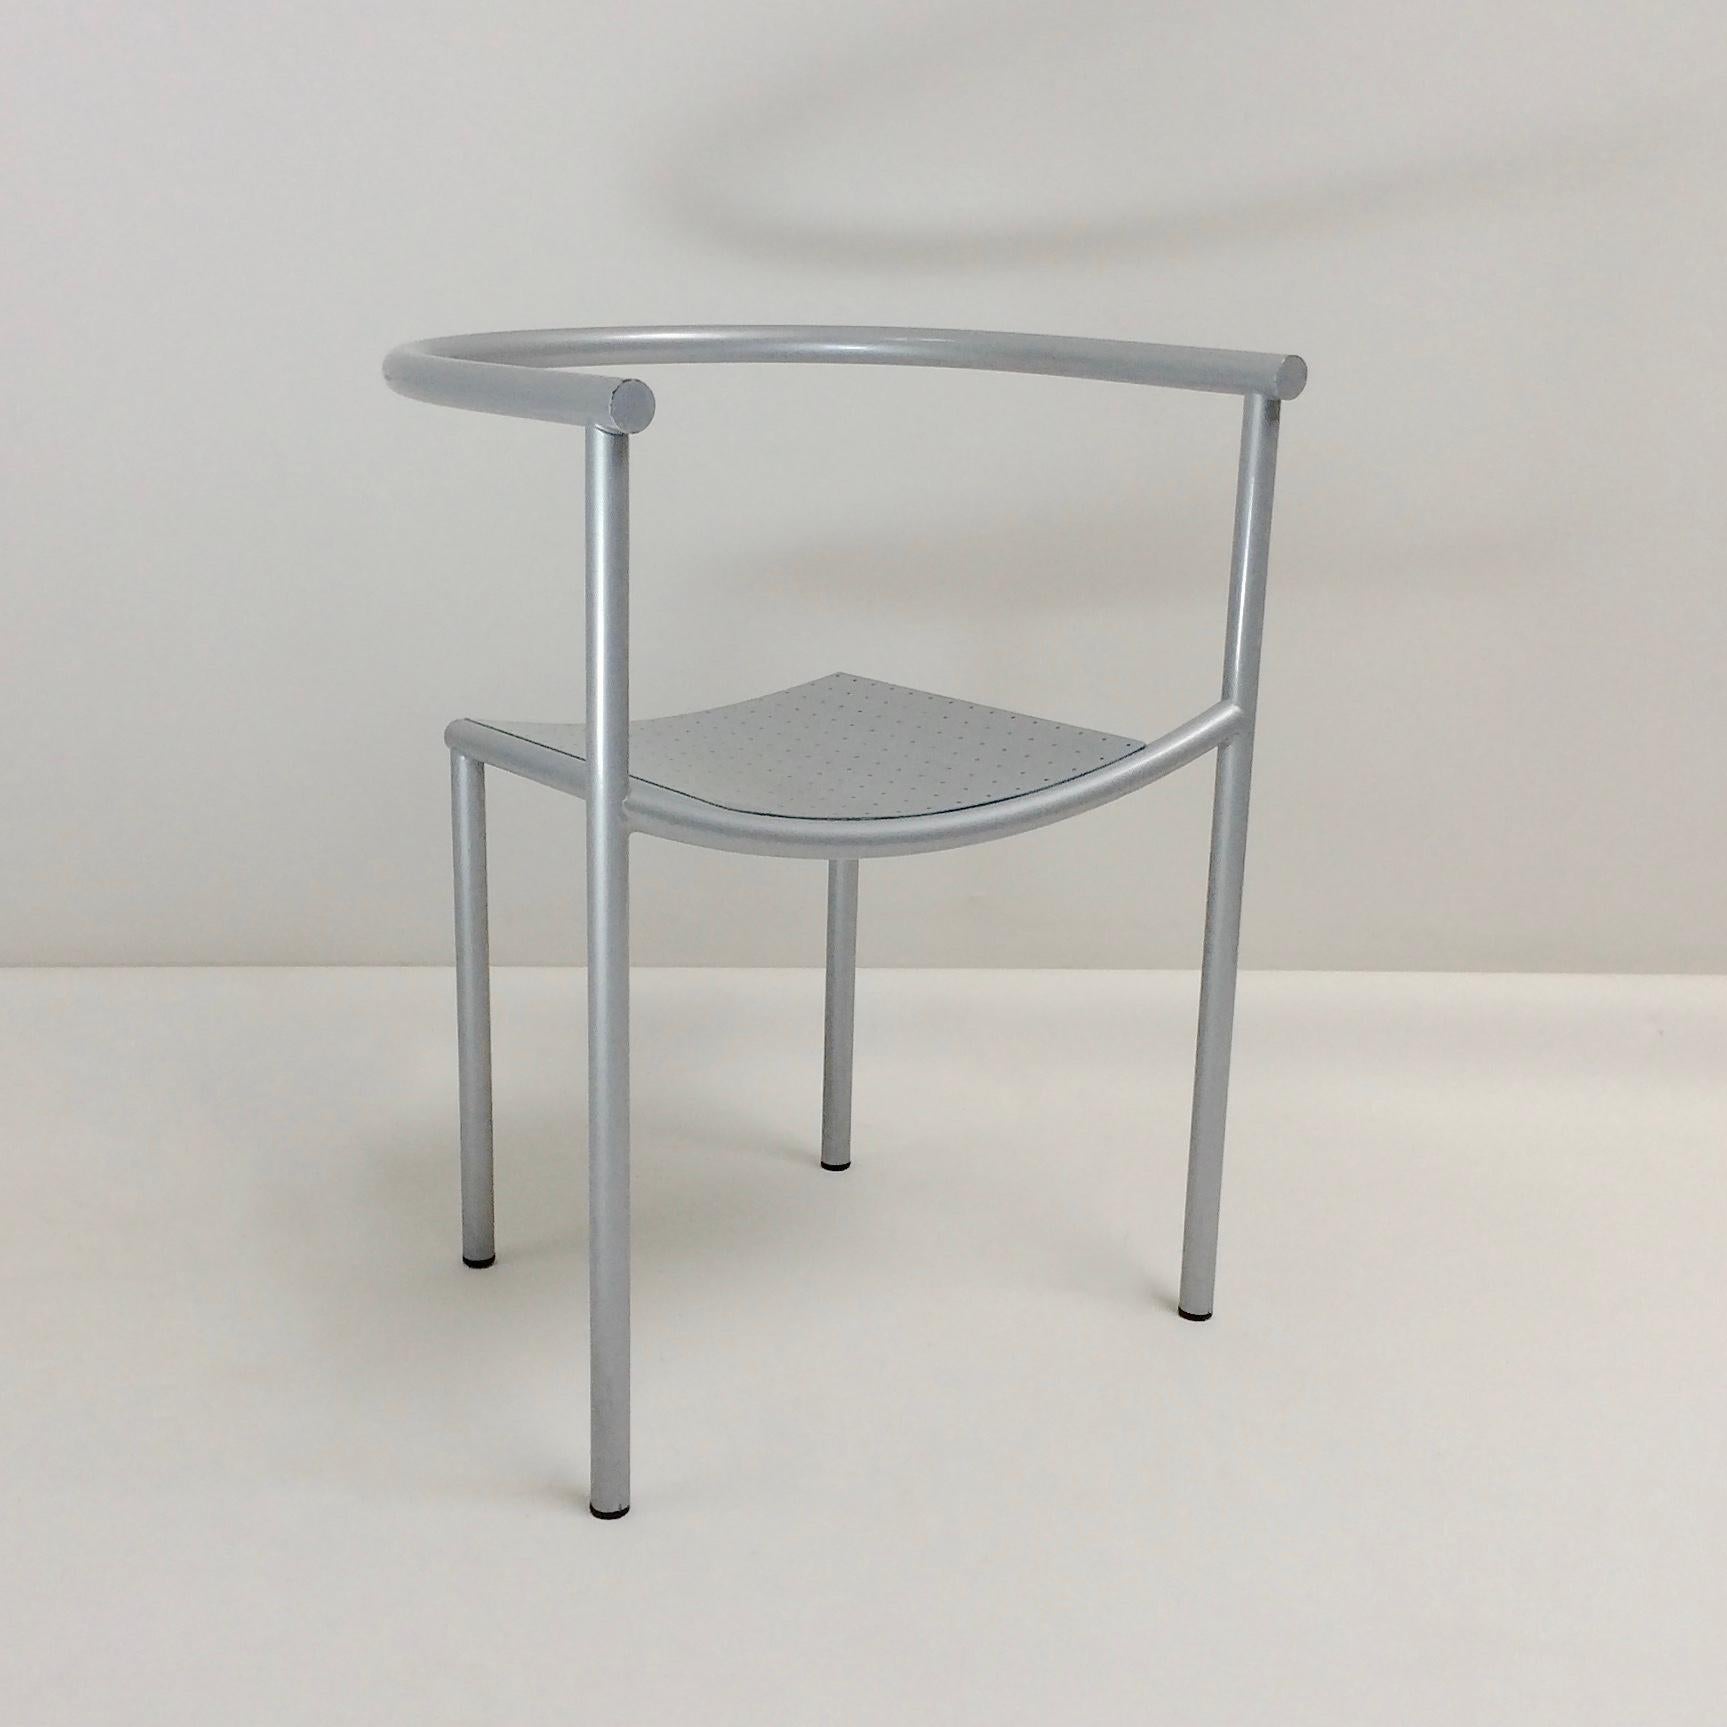 Von Vogelsang chair by Philippe Starck for Driade, circa1985, France.
Model created in 1985 for Cafe Rothschild.
Tubular steel and perforated metal sheet.
Dimensions: 54 cm W, 72 cm H, 51 cm D, seat height: 43 cm.
Bilbliography: Starck by Christine